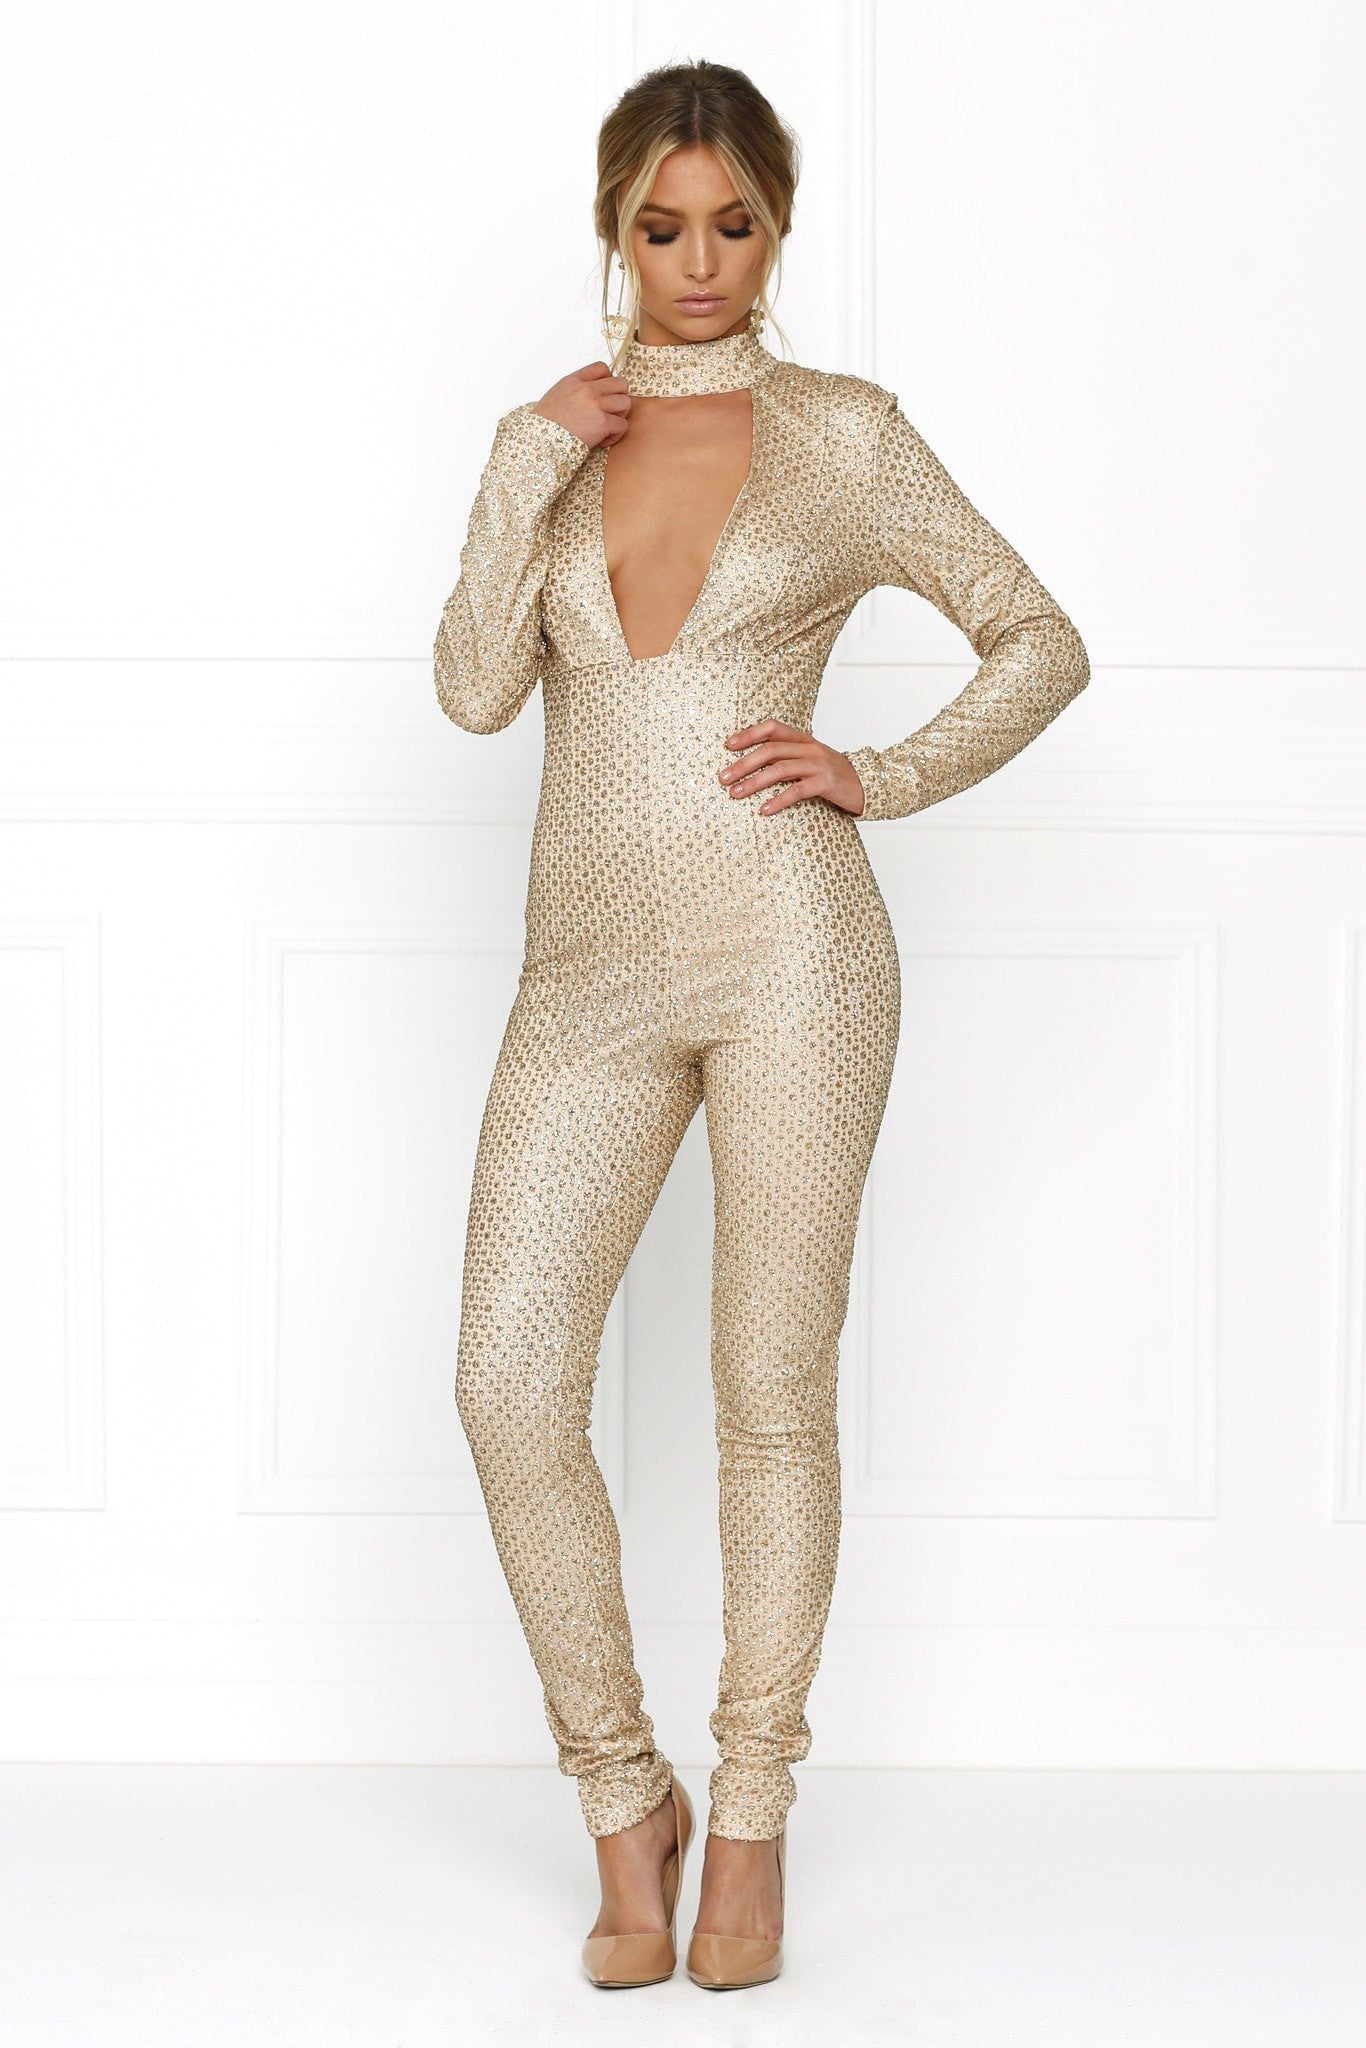 Honey Couture GLITA Gold Deep V Front Jumpsuit Honey Couture$ AfterPay Humm ZipPay LayBuy Sezzle